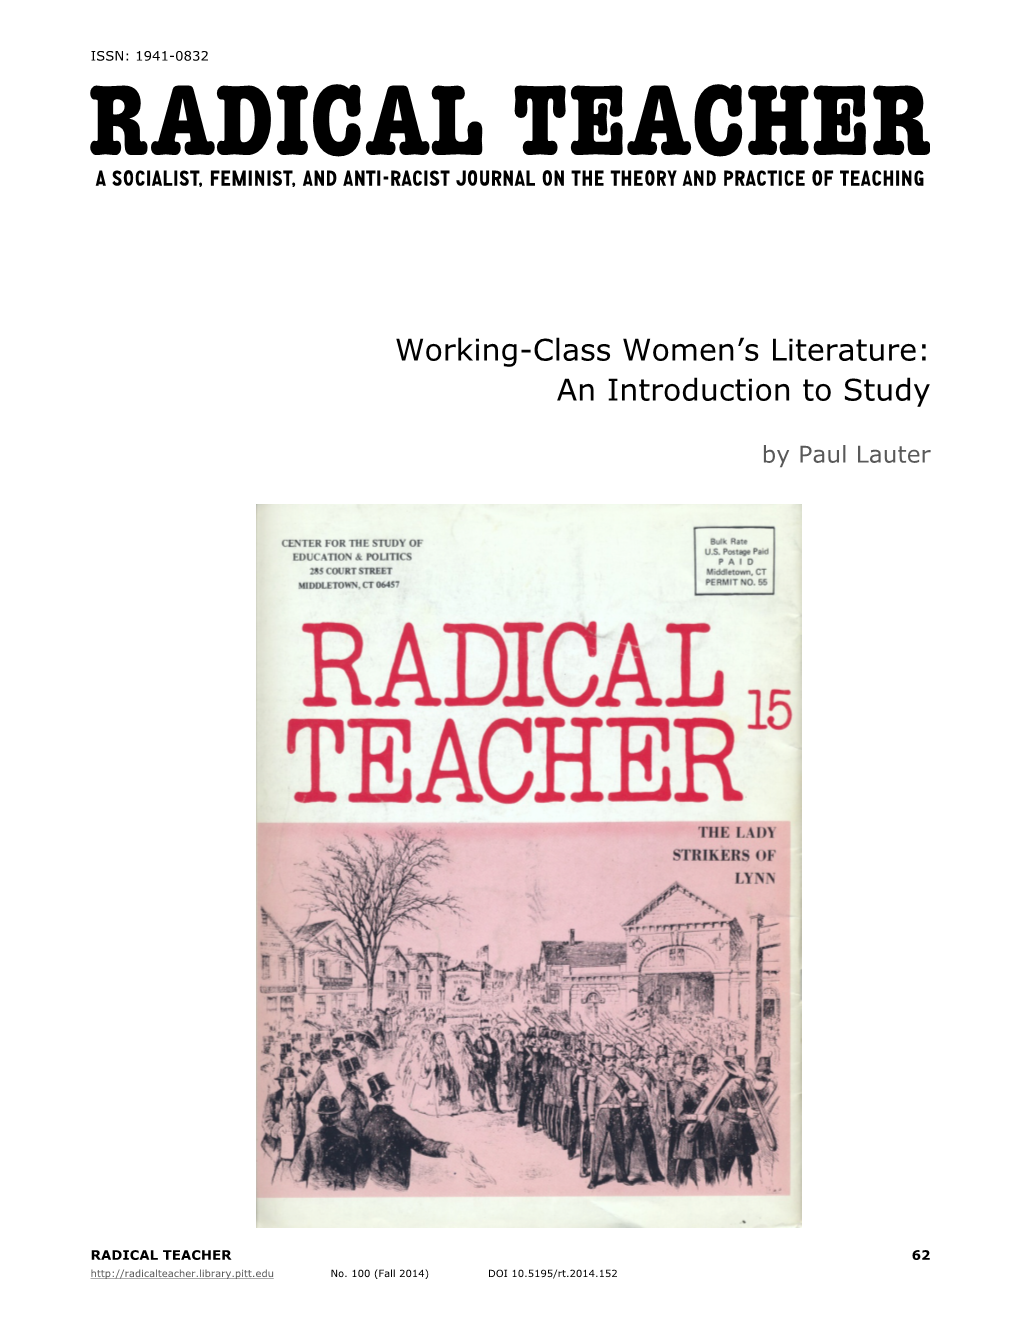 Working-Class Women's Literature: an Introduction to Study